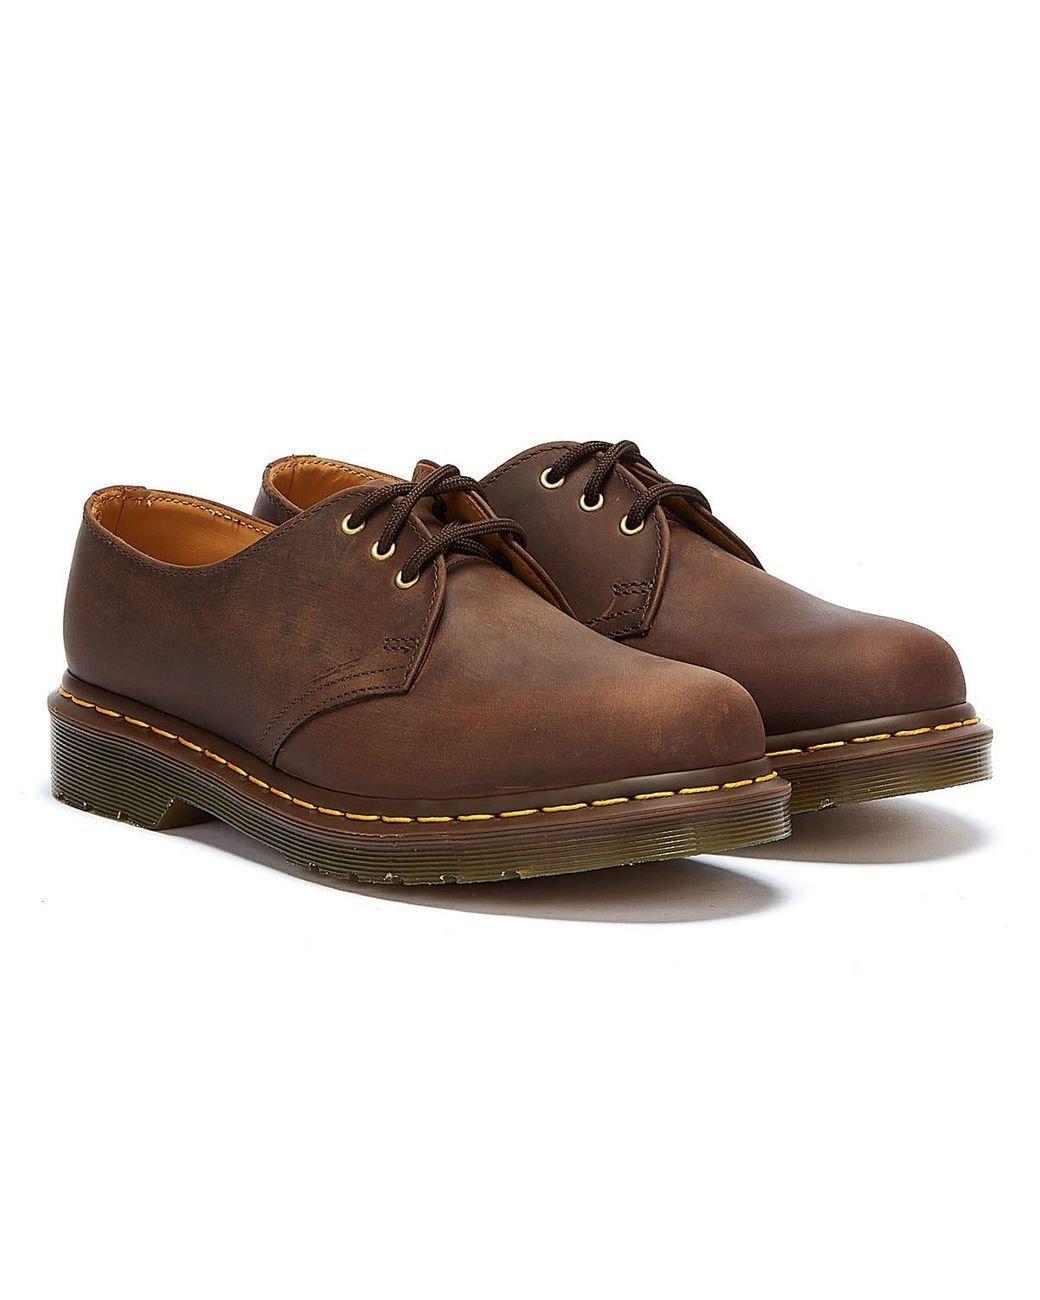 Dr. Martens 1461 Smooth Shoes Classic 3 Eye Lace Up Unisex - Dark Brown - UK 13